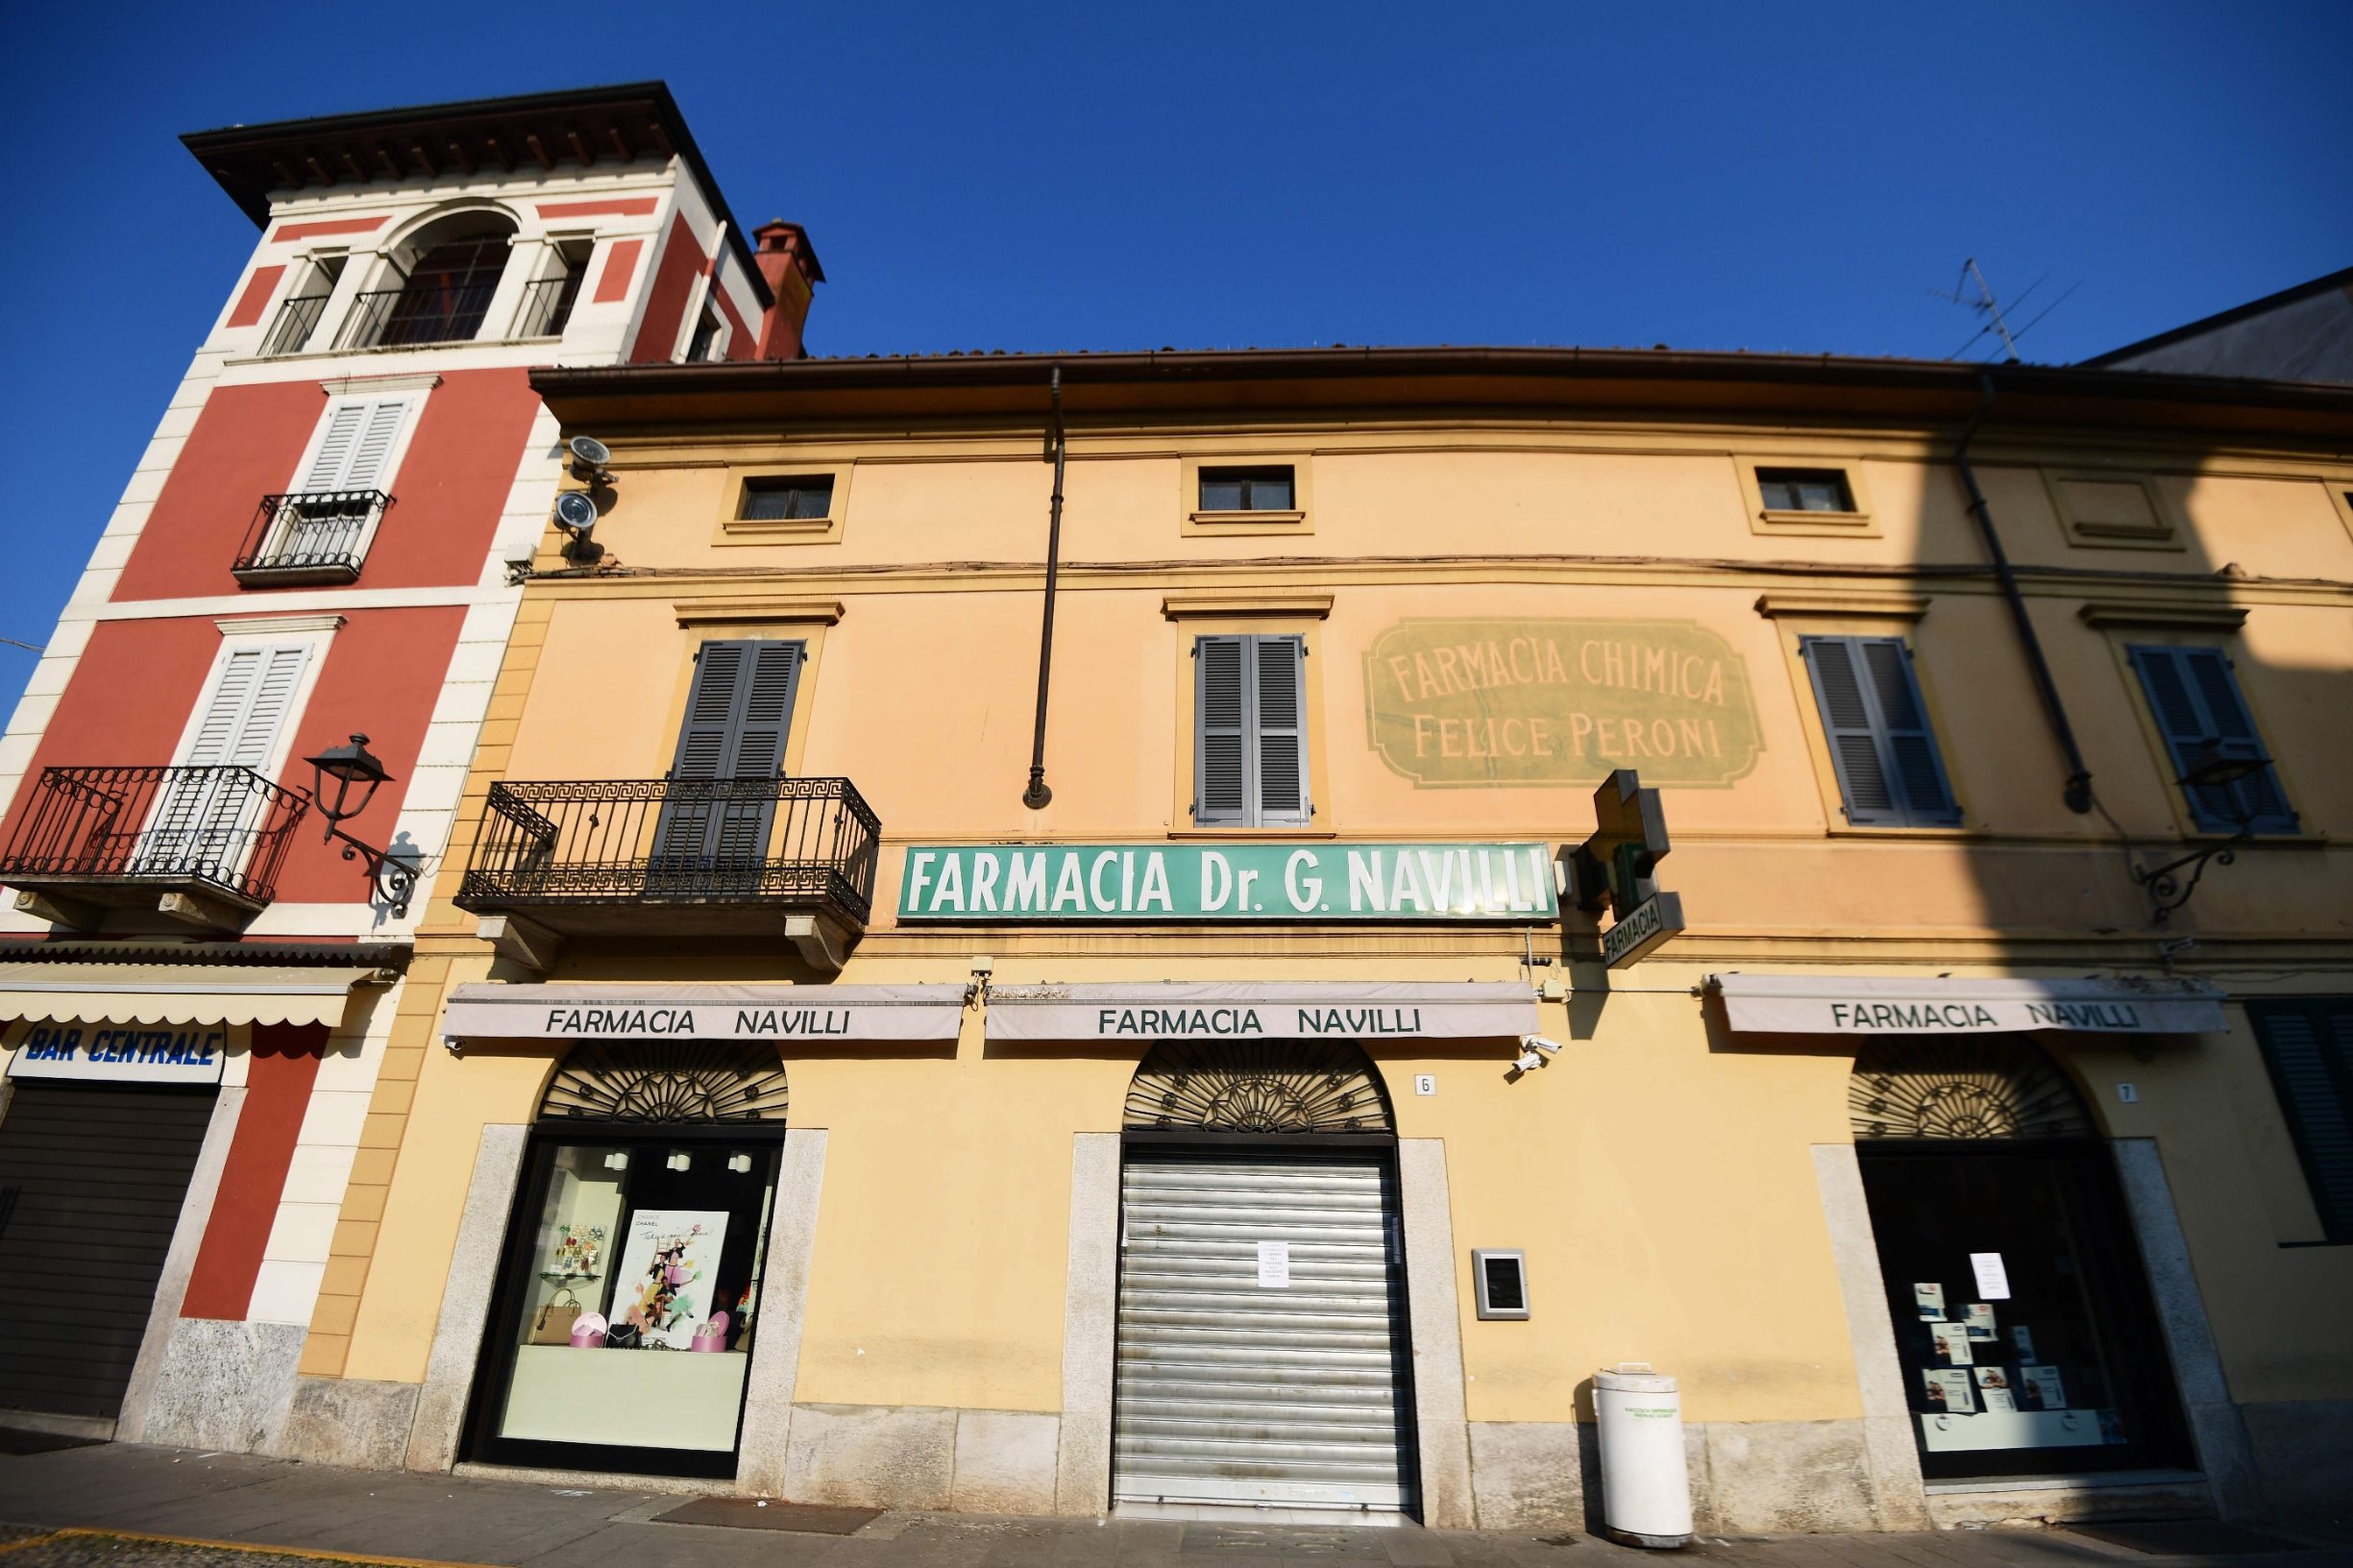 A closed pharmacy is pictured in Codogno, southeast of Milan, on February 22, 2020. - An Italian man became the first European to die after being infected with the coronavirus on February 21, just hours after 10 towns in the country were locked down following a flurry of new cases. (Photo by Miguel MEDINA / AFP)